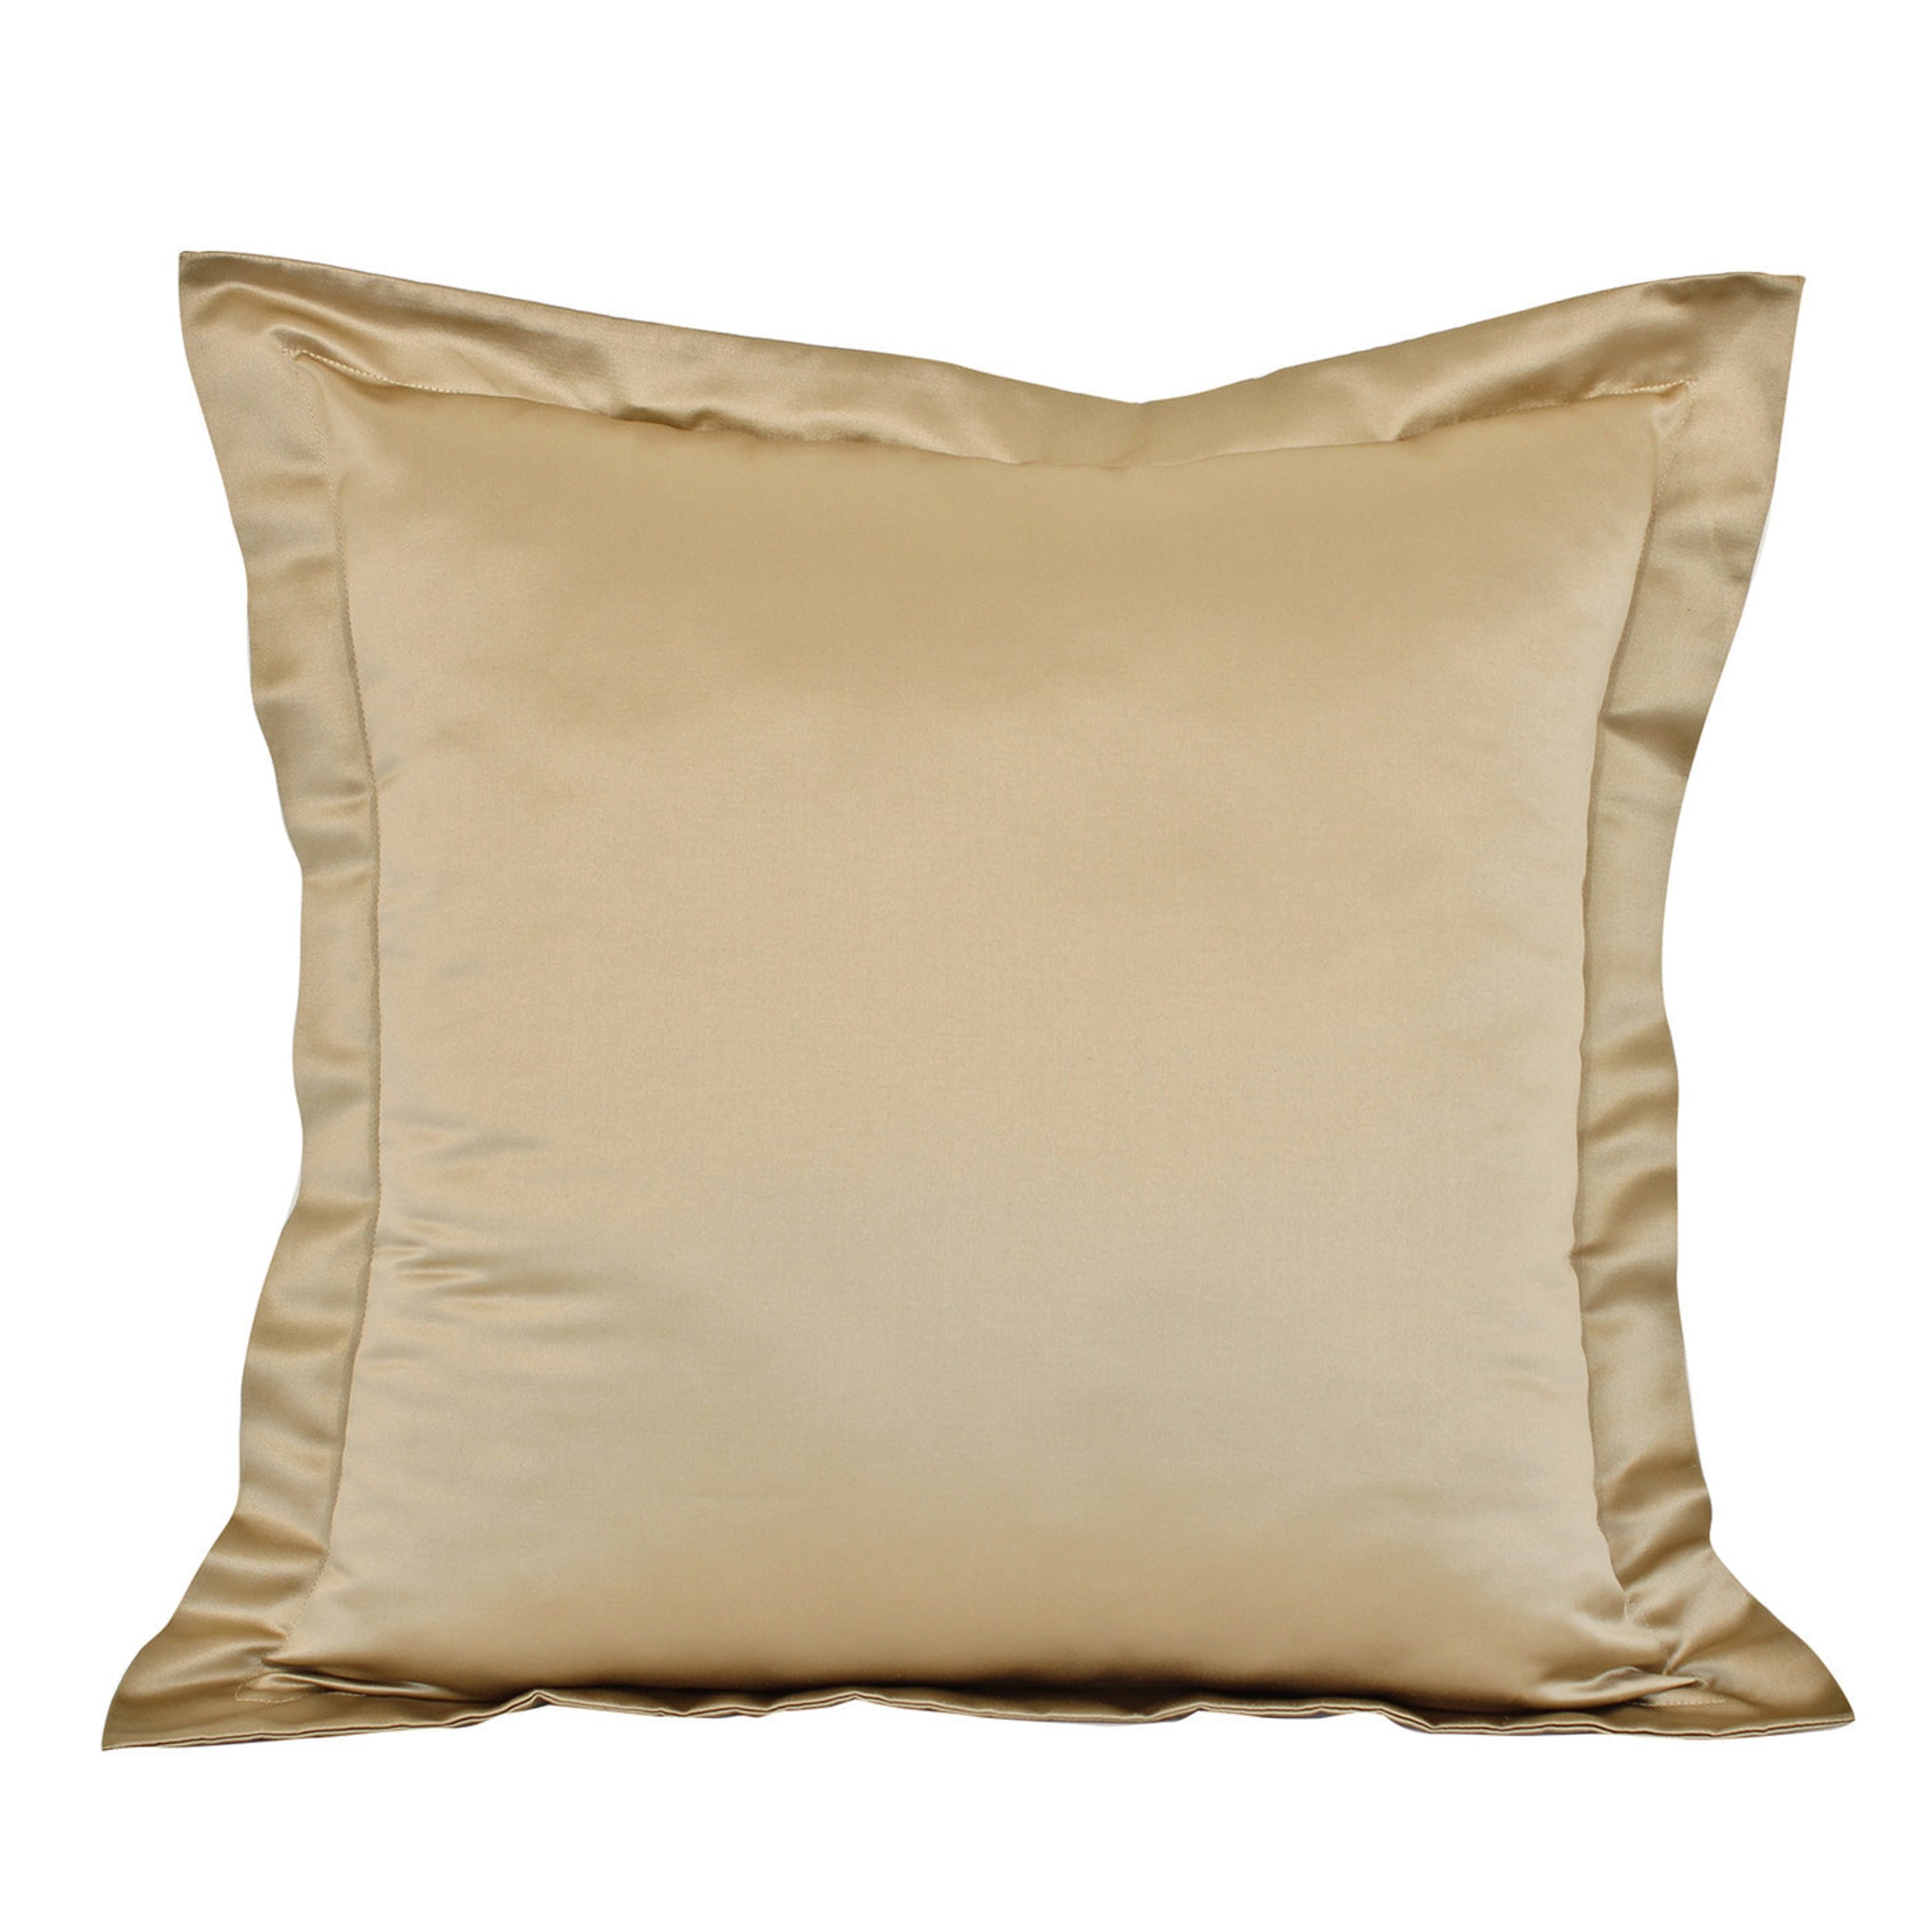 Set of 2 Large Beige Cushions - Main view